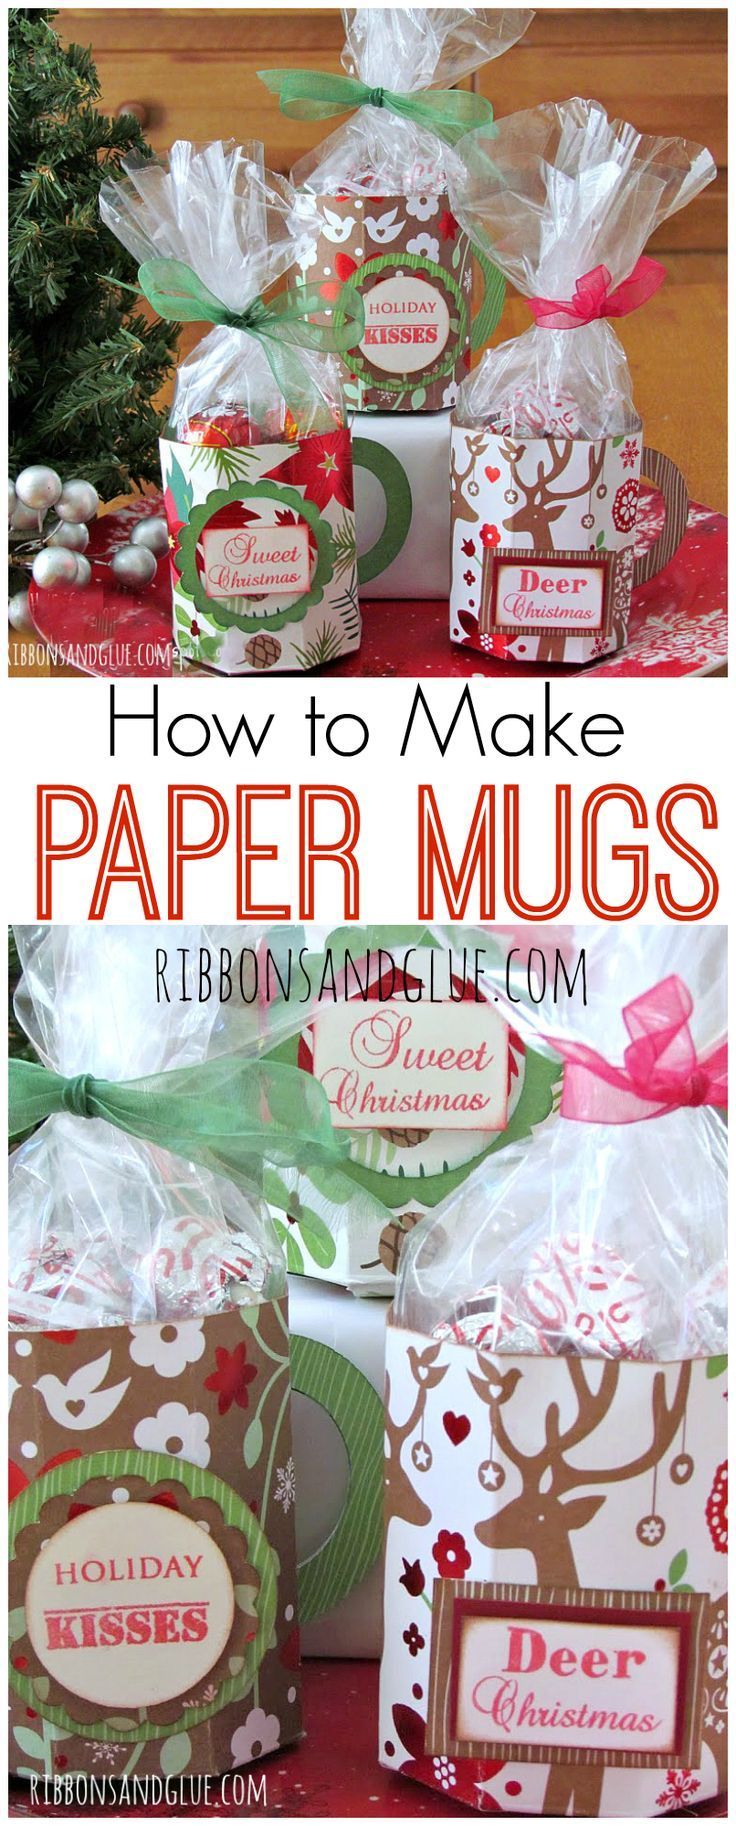 Paper Mug Tutorial -   25 cool crafts with paper
 ideas